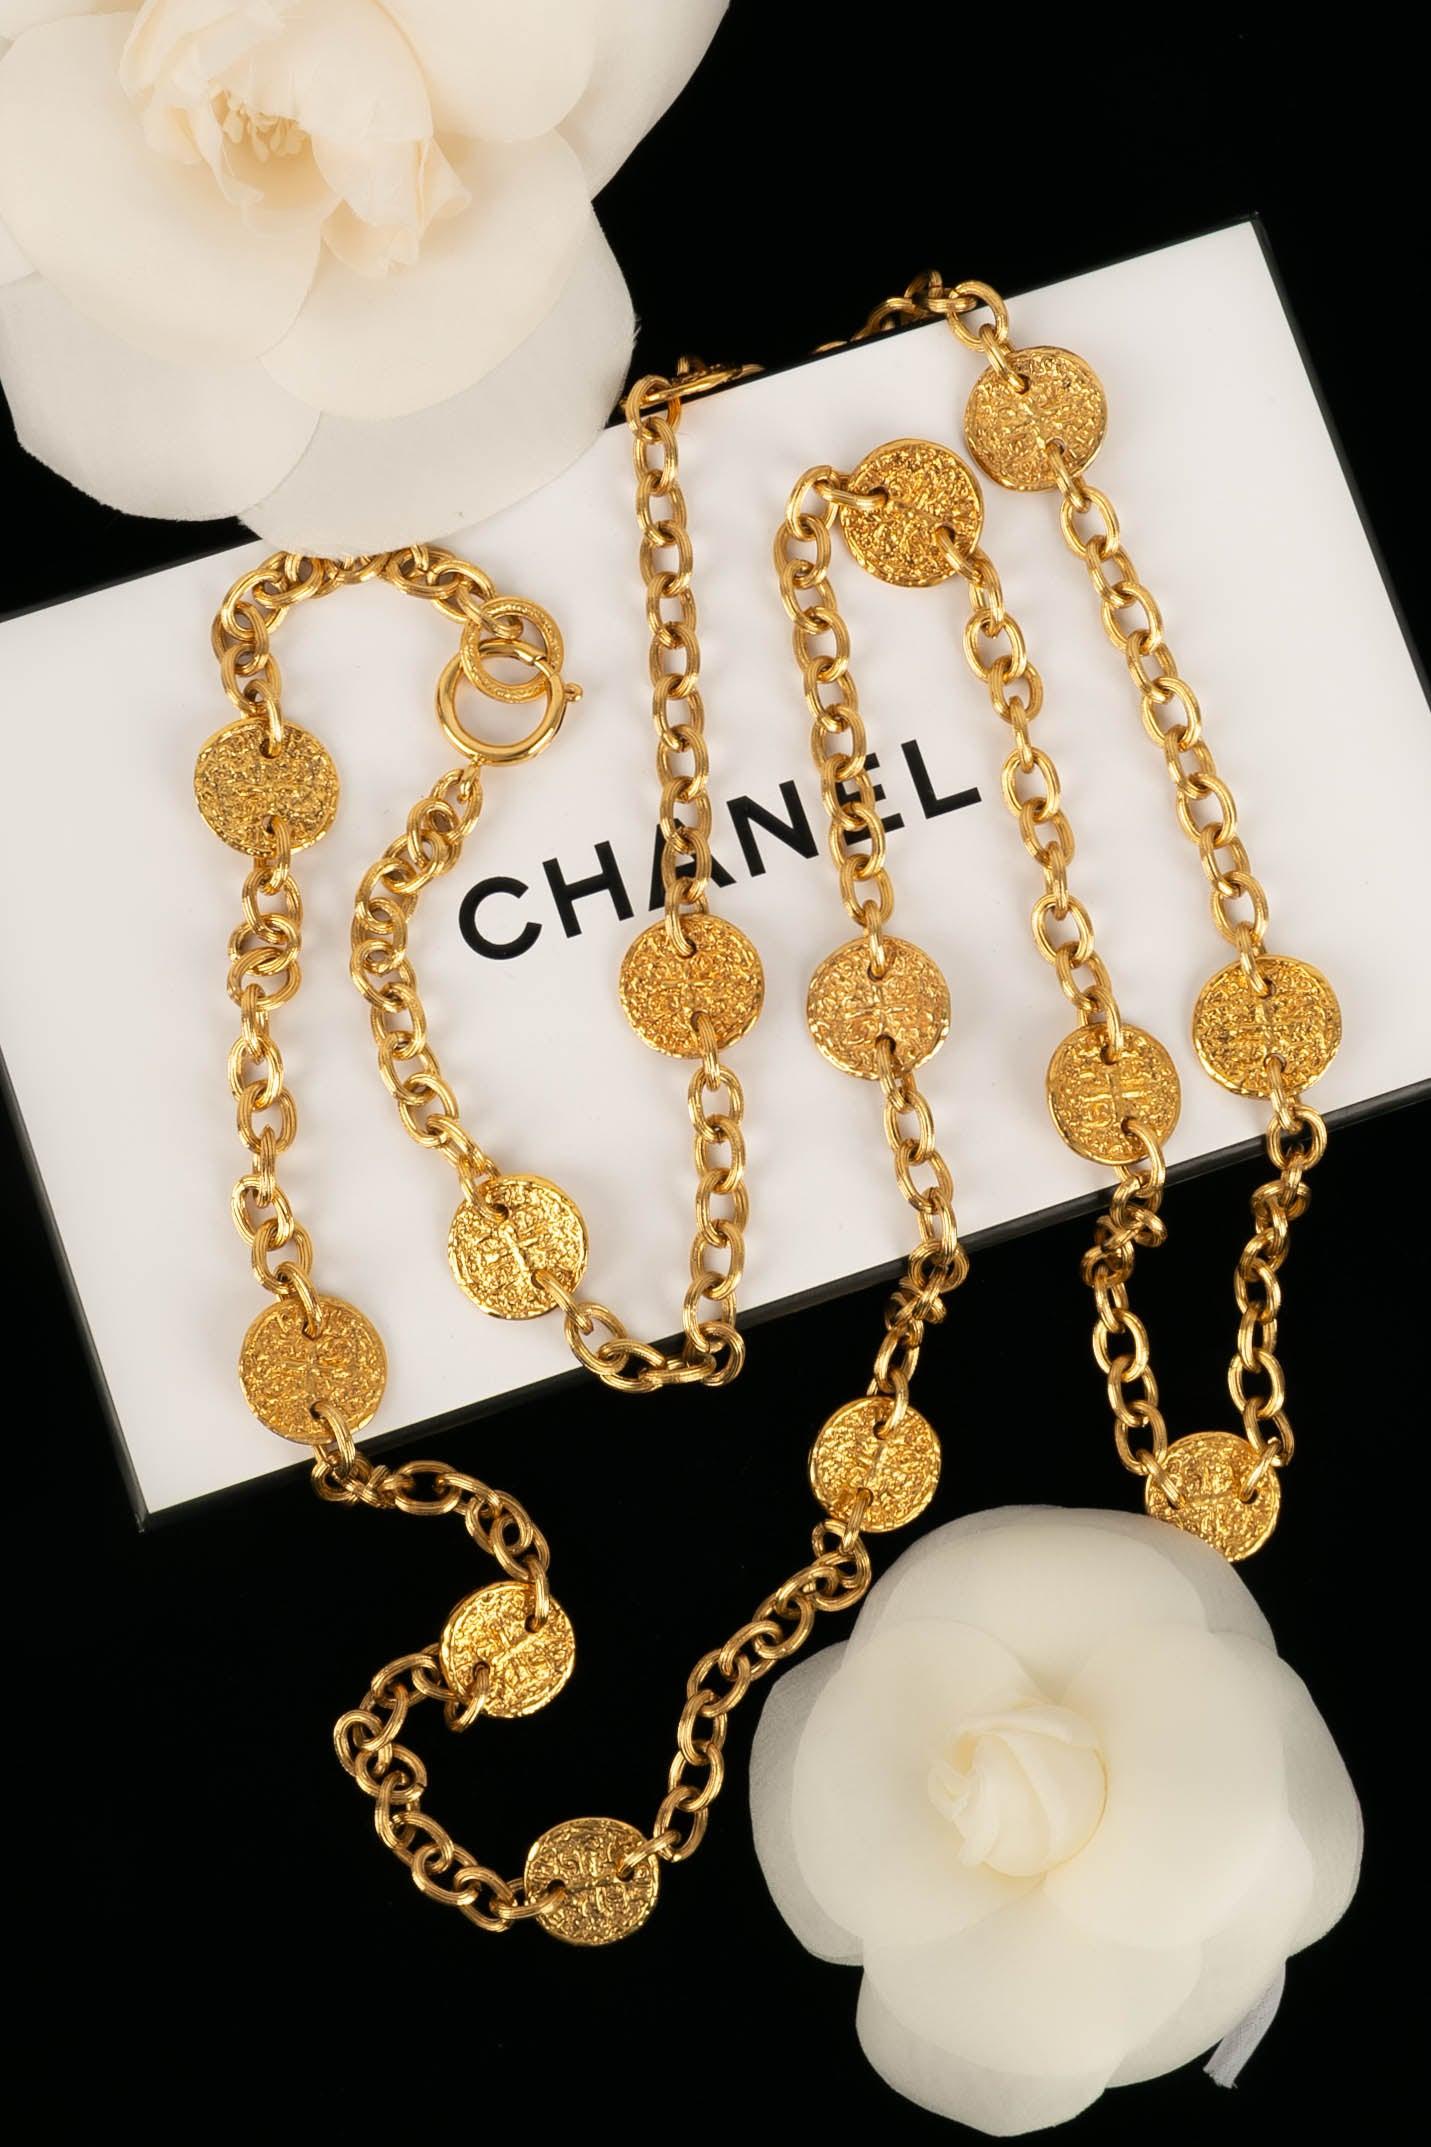 Chanel Necklace in Gold Metal Chain and Medals 4